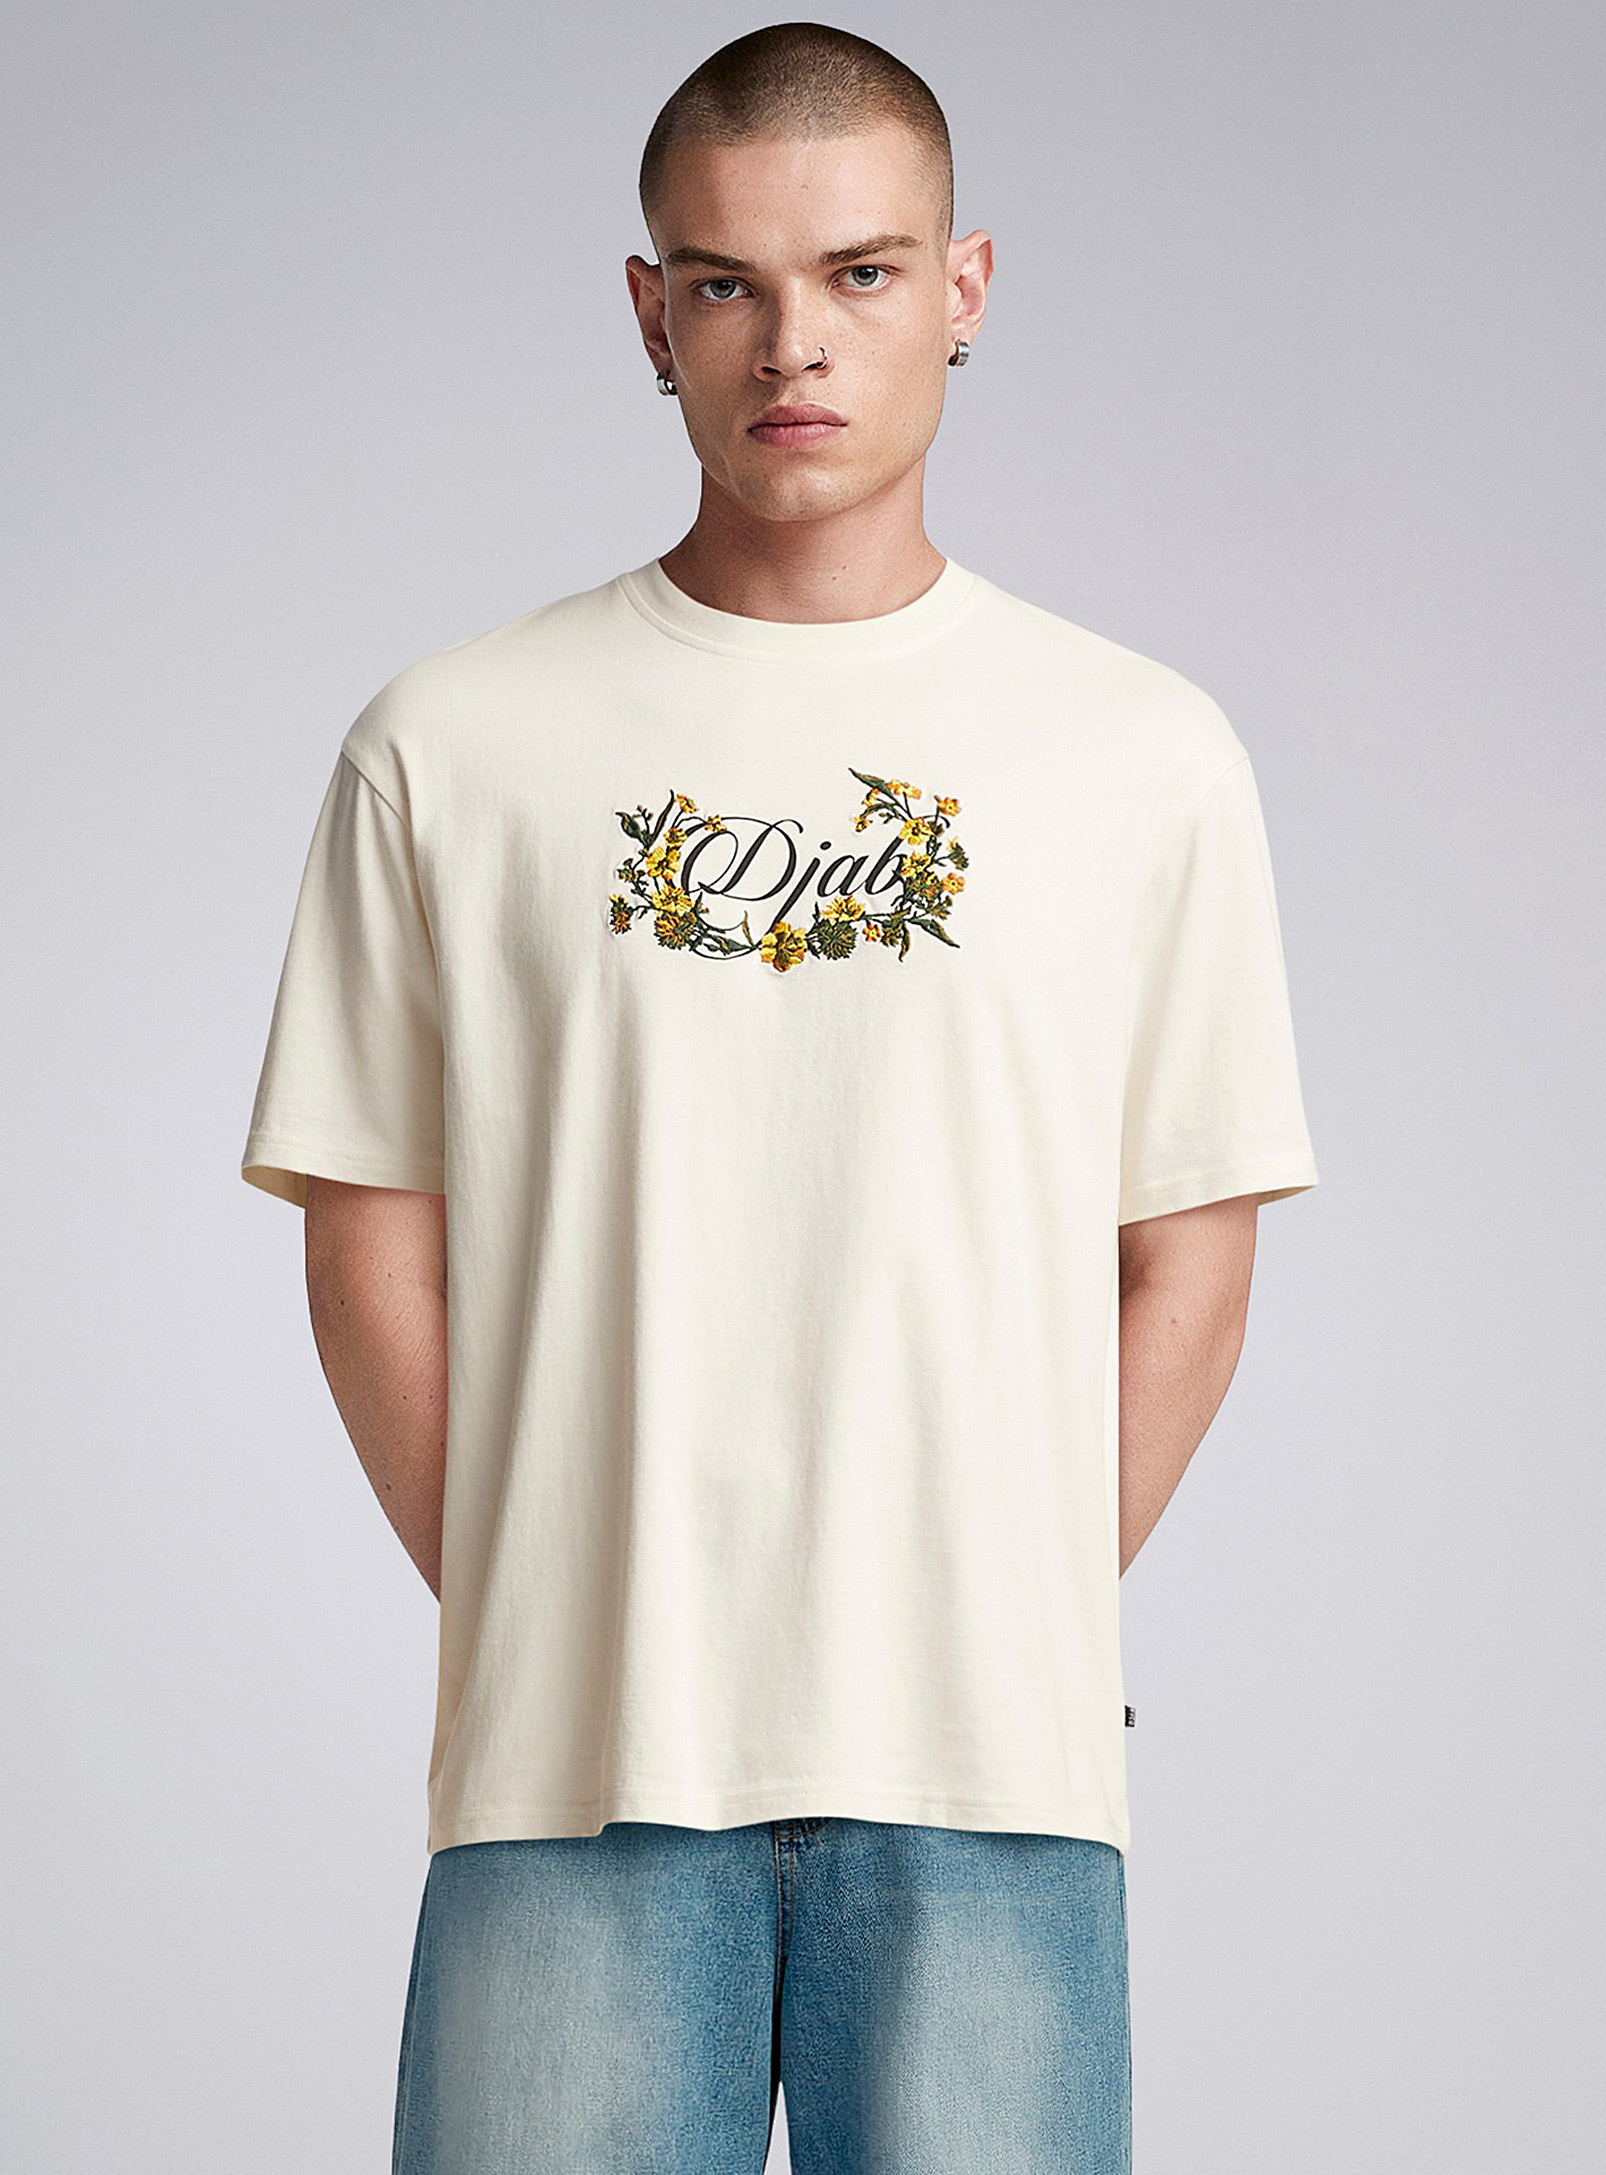 Djab Floral Embroidery Logo T-shirt Boxy Fit In Ivory/cream Beige